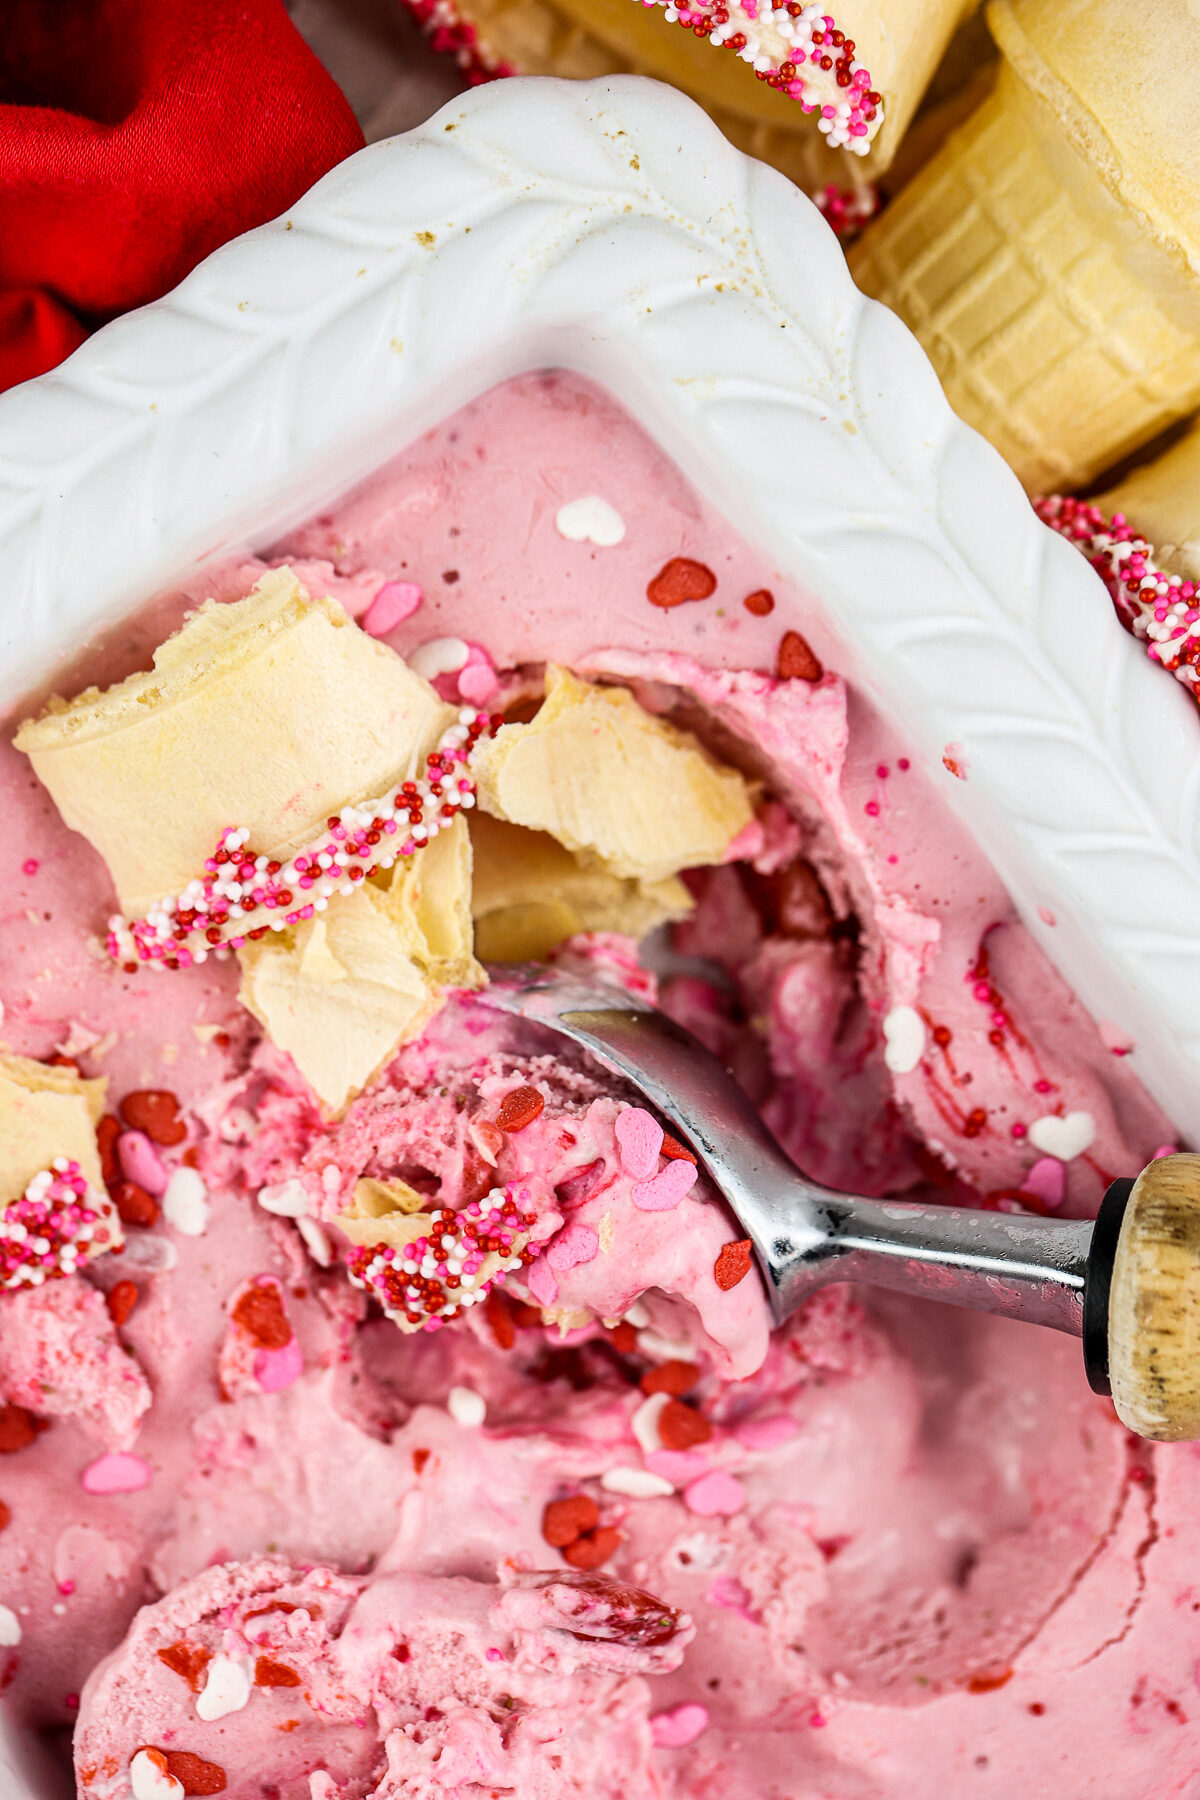 Picture of white pan with strawberry nice cream inside with crushed golden cake cones and a brown and silver ice cream scoop peaking out the side.